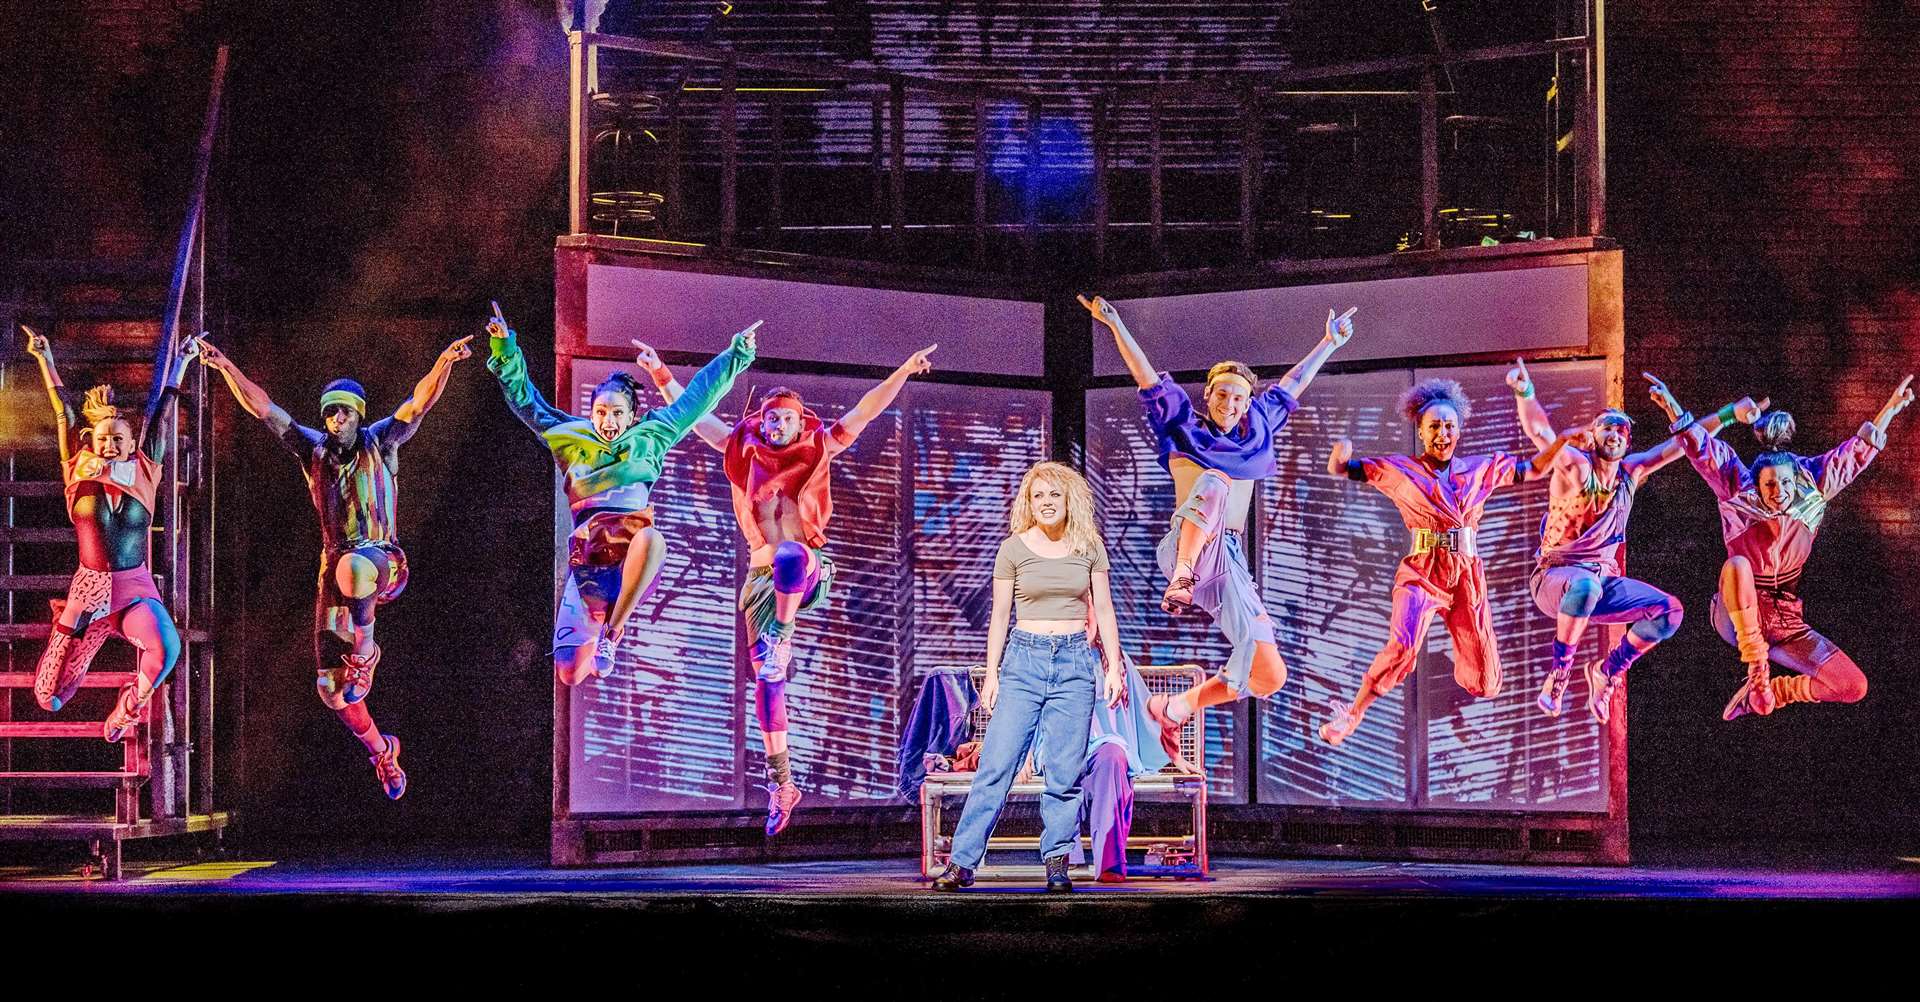 Flashdance, the musical stars Joanne Clifton from Strictly